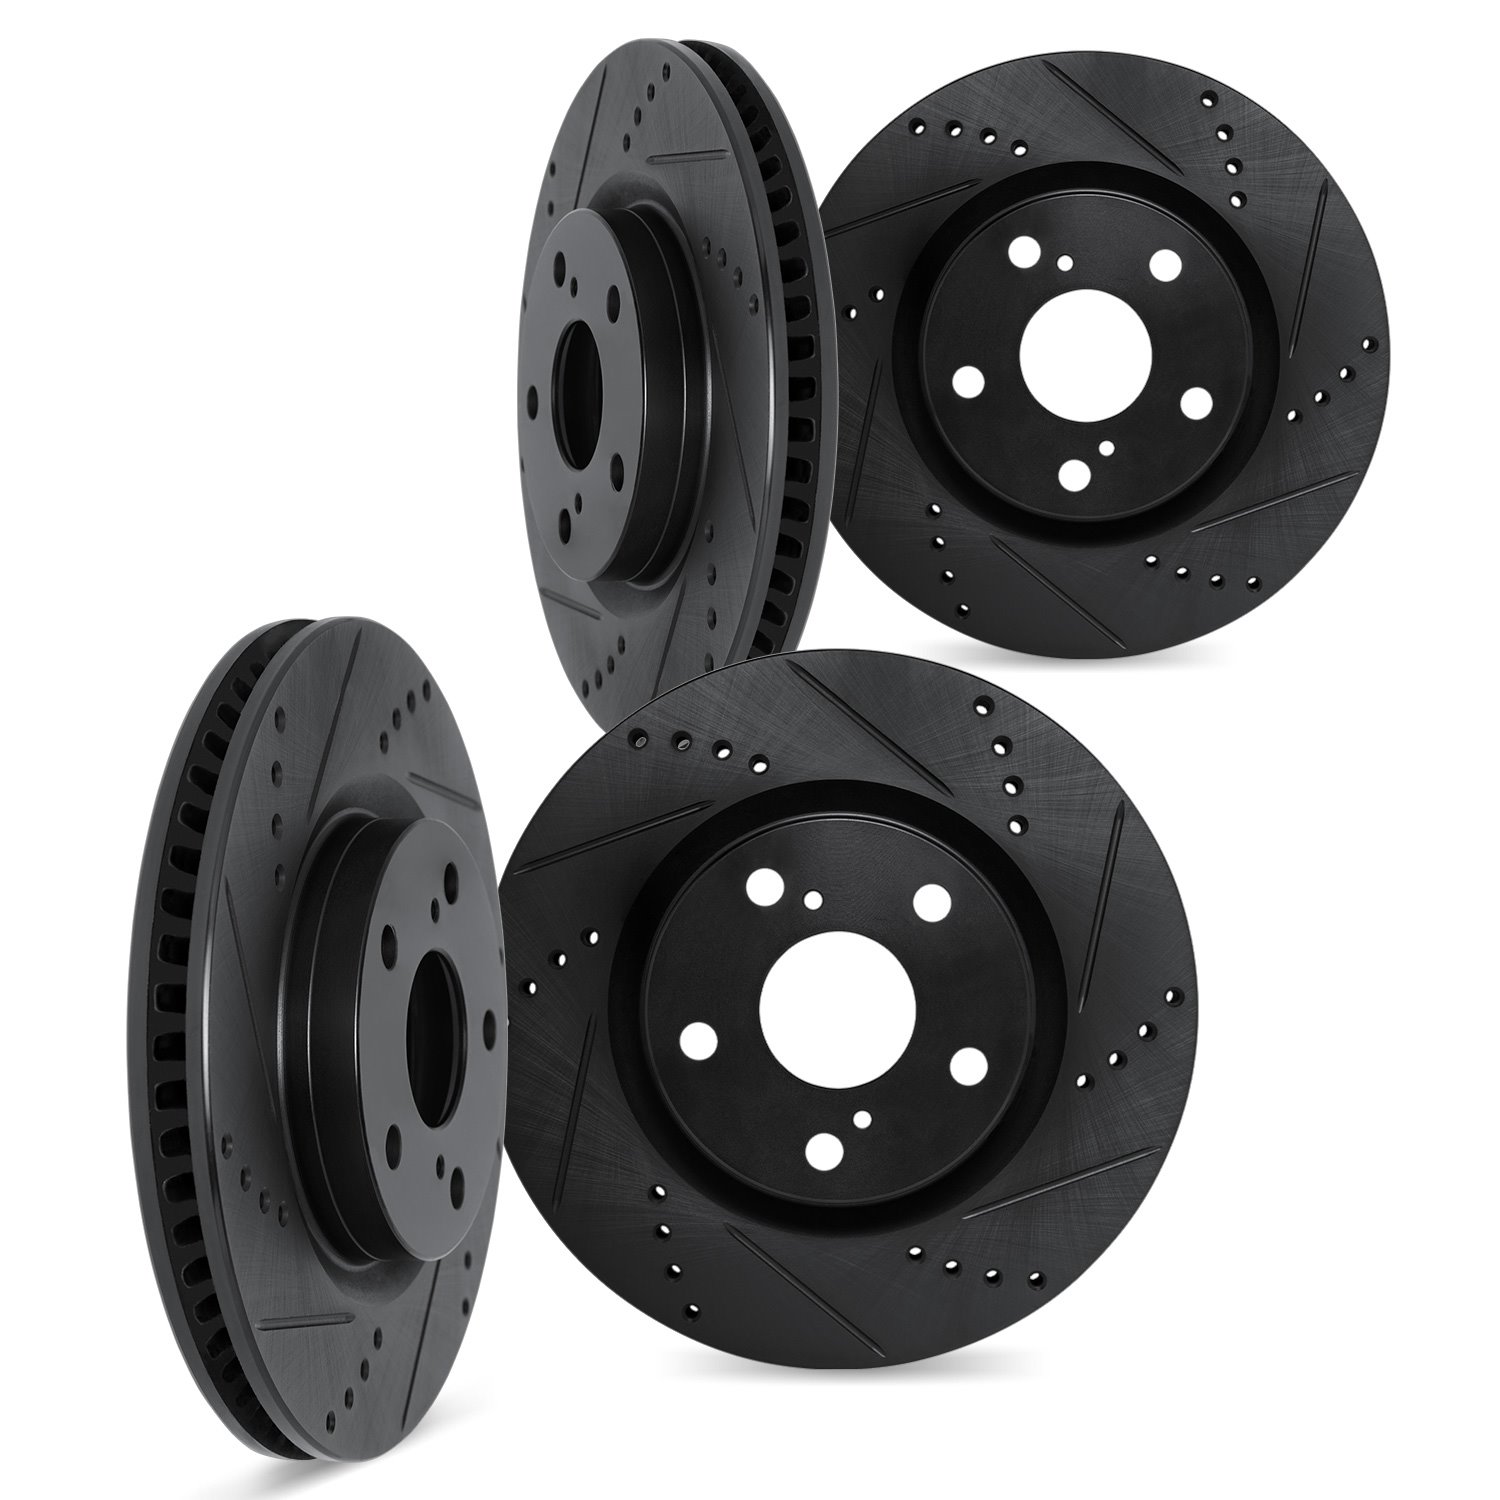 8004-75029 Drilled/Slotted Brake Rotors [Black], 1992-1998 Lexus/Toyota/Scion, Position: Front and Rear